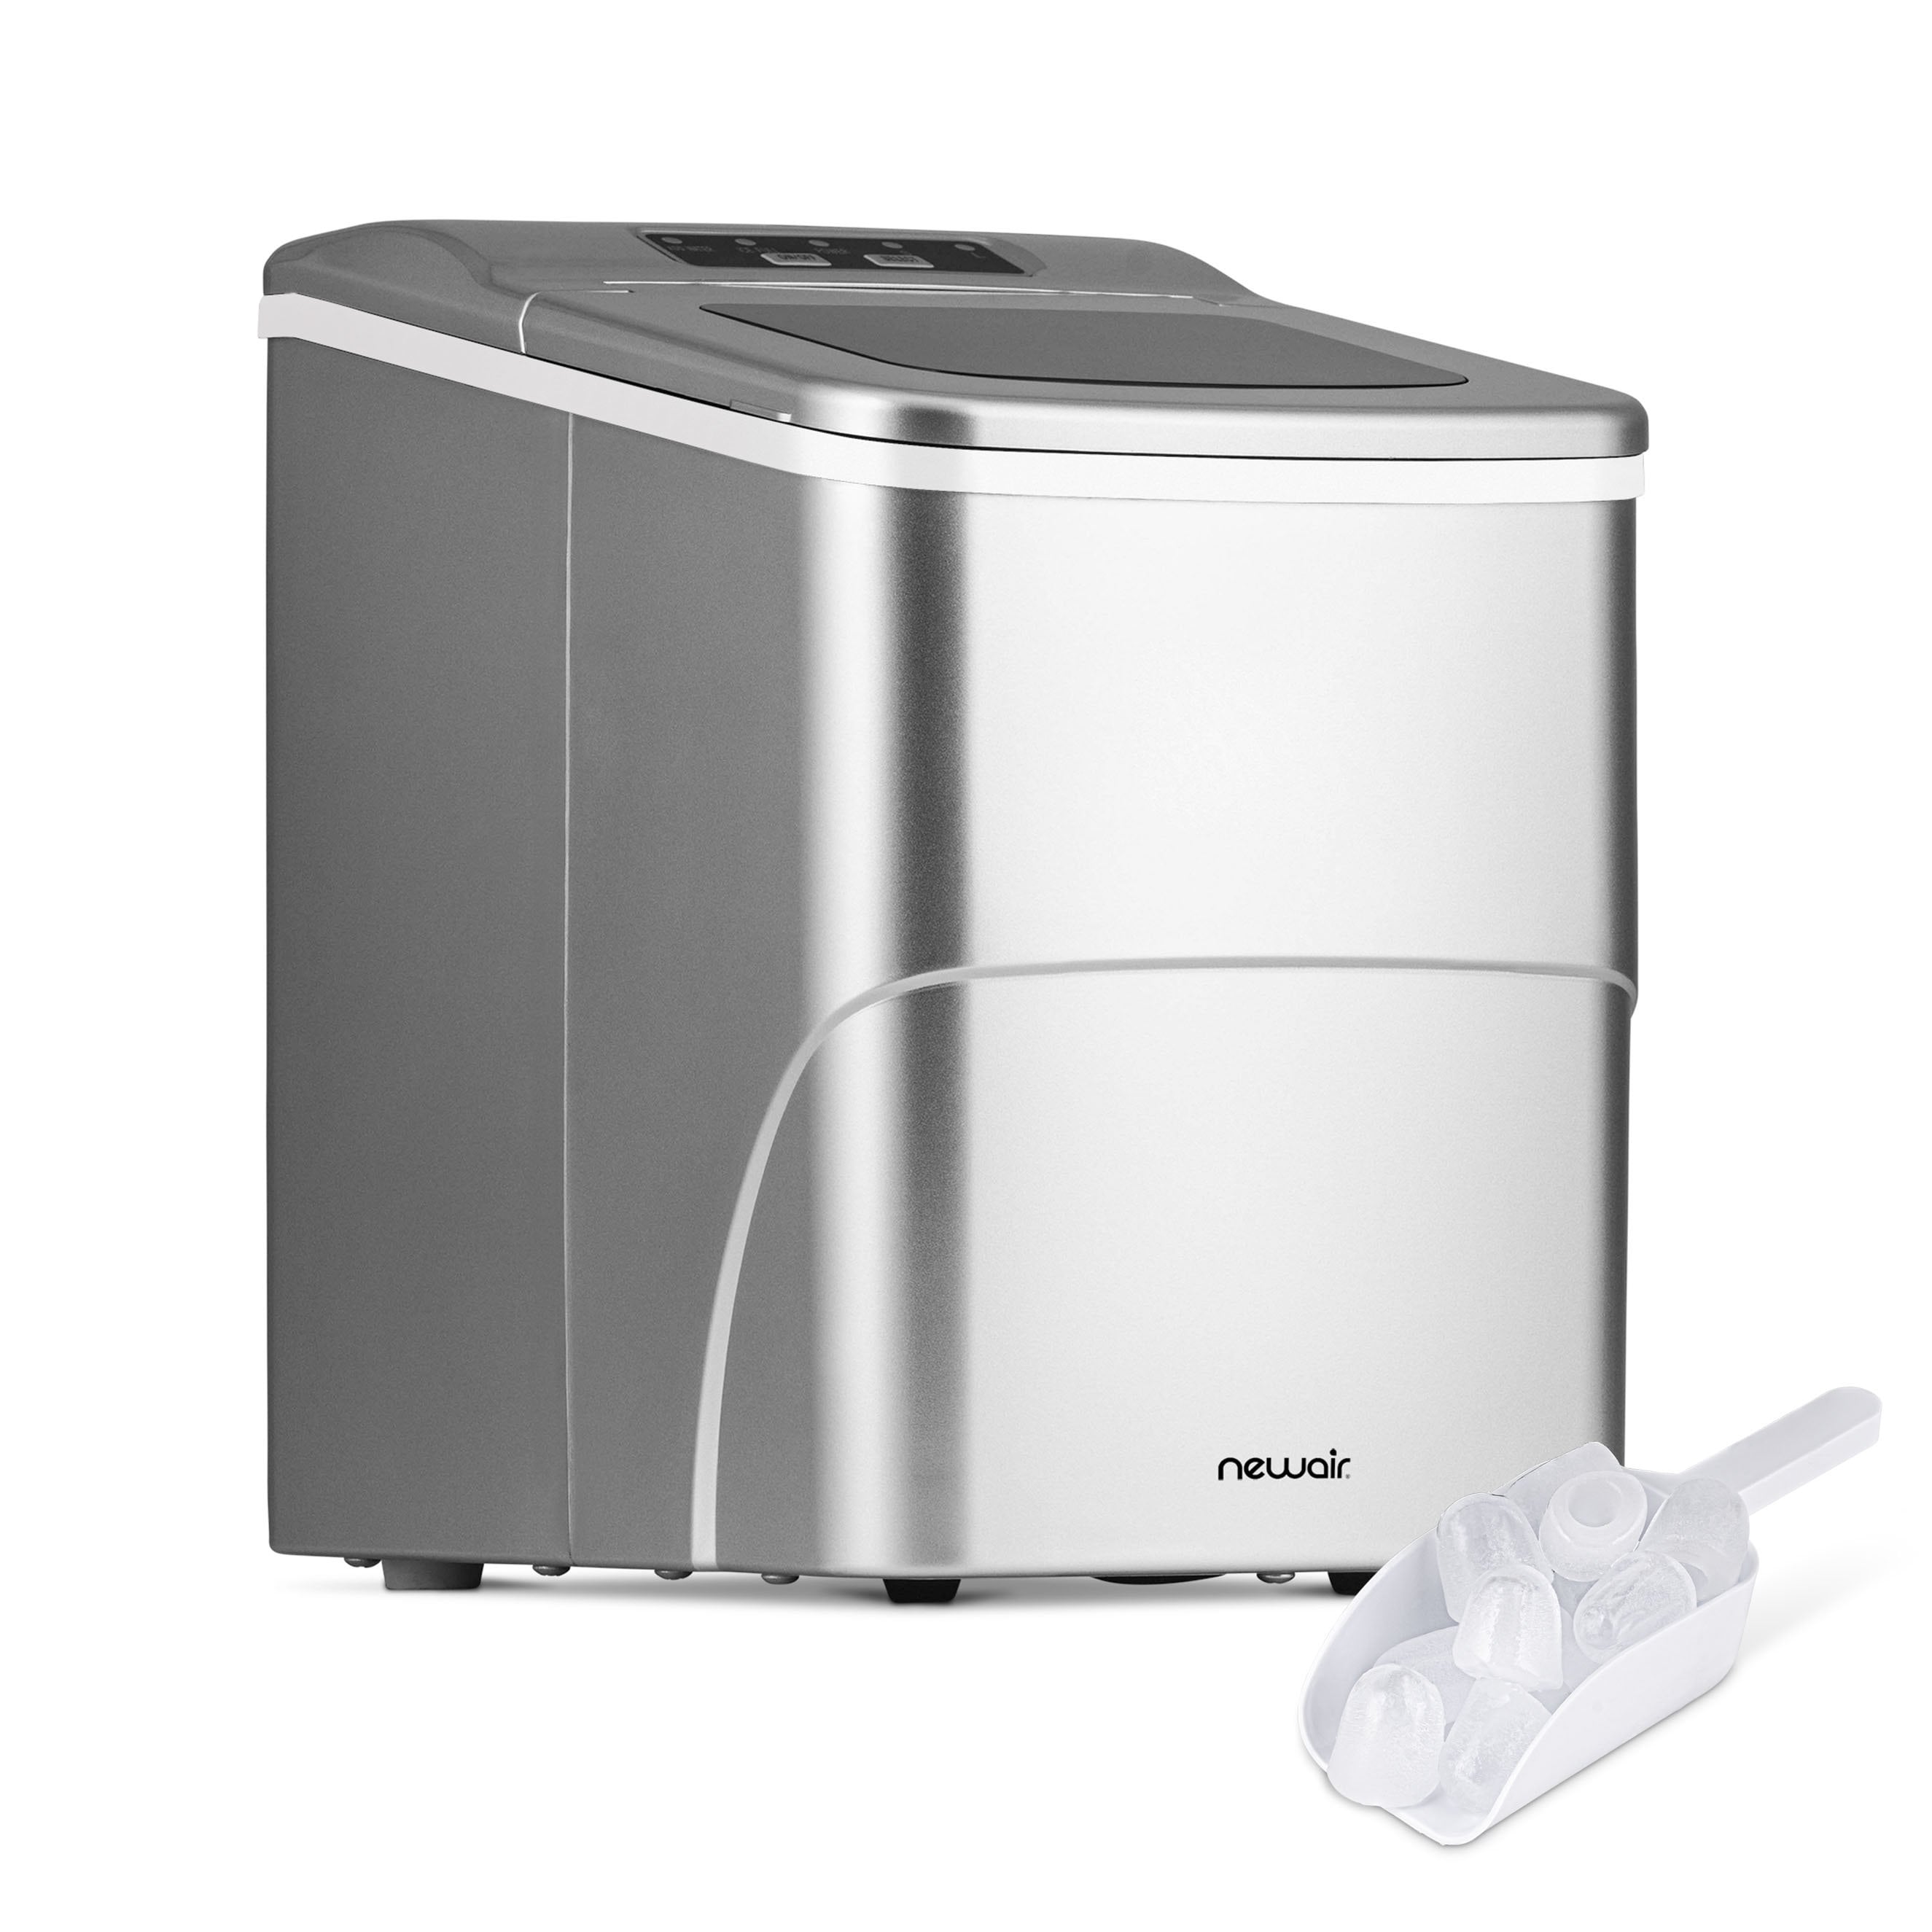 Igloo Automatic Self-Cleaning 26-Pound Ice Maker - Bed Bath